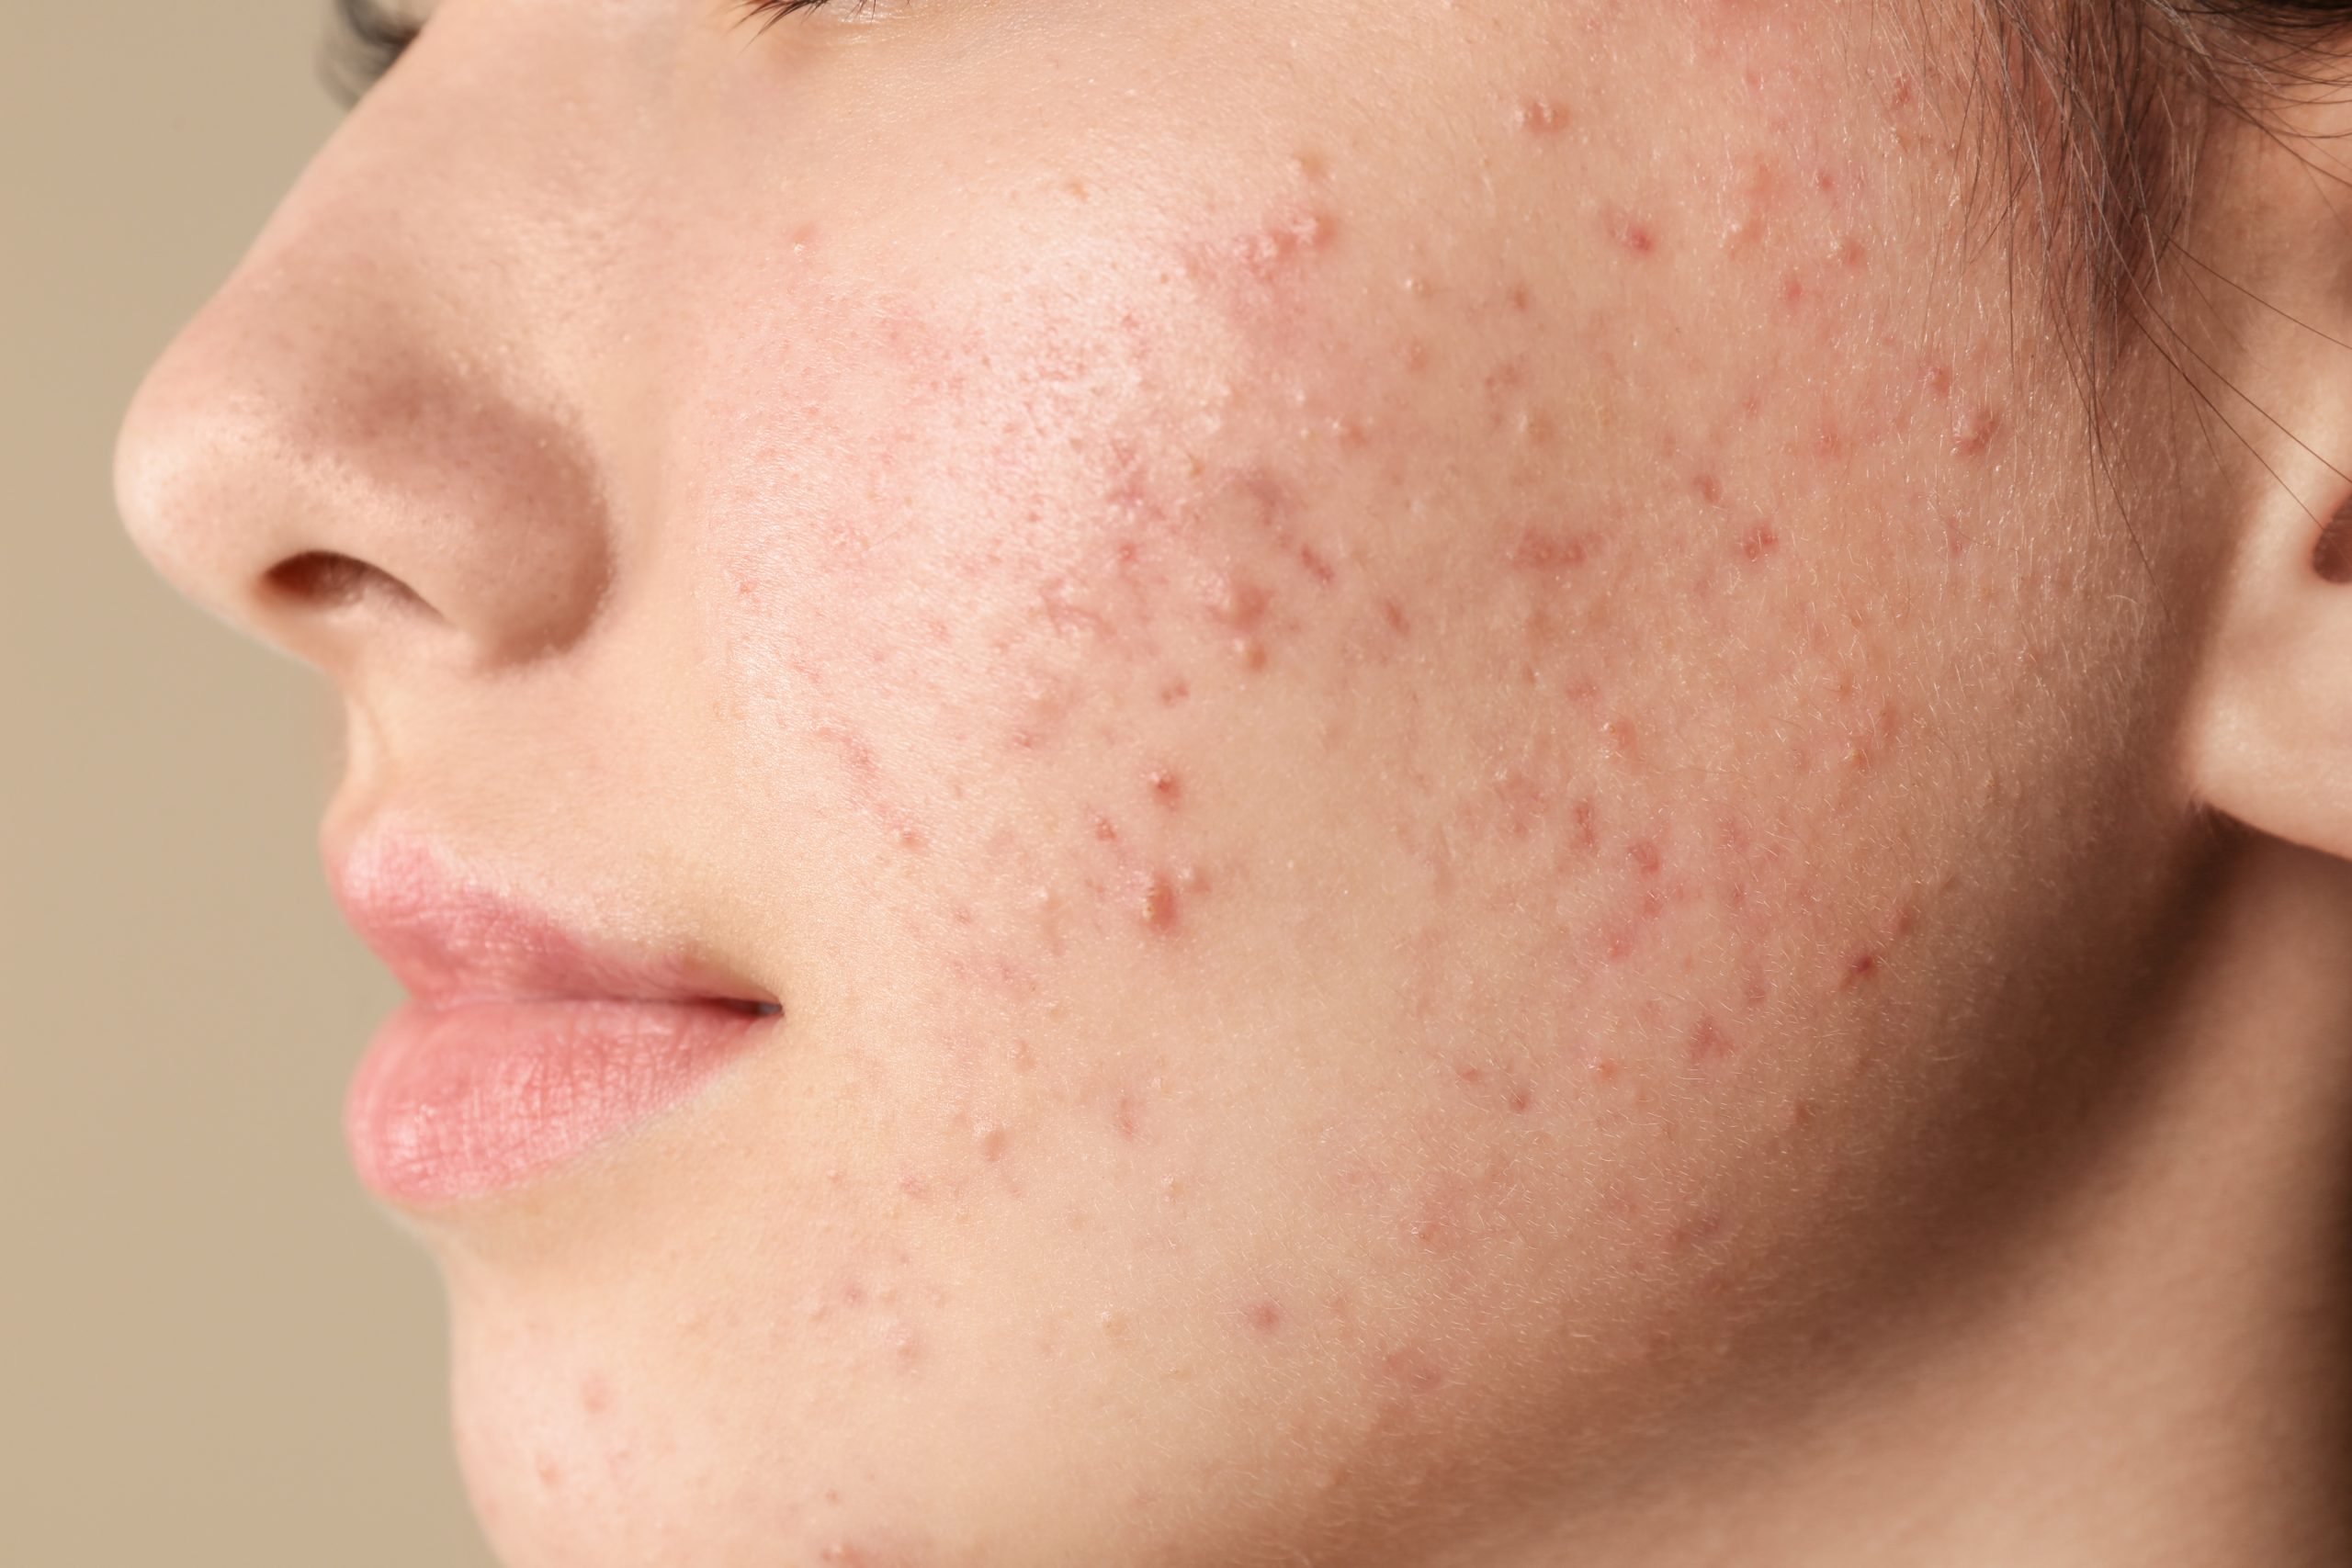 Does Dirty Skin Cause Acne?